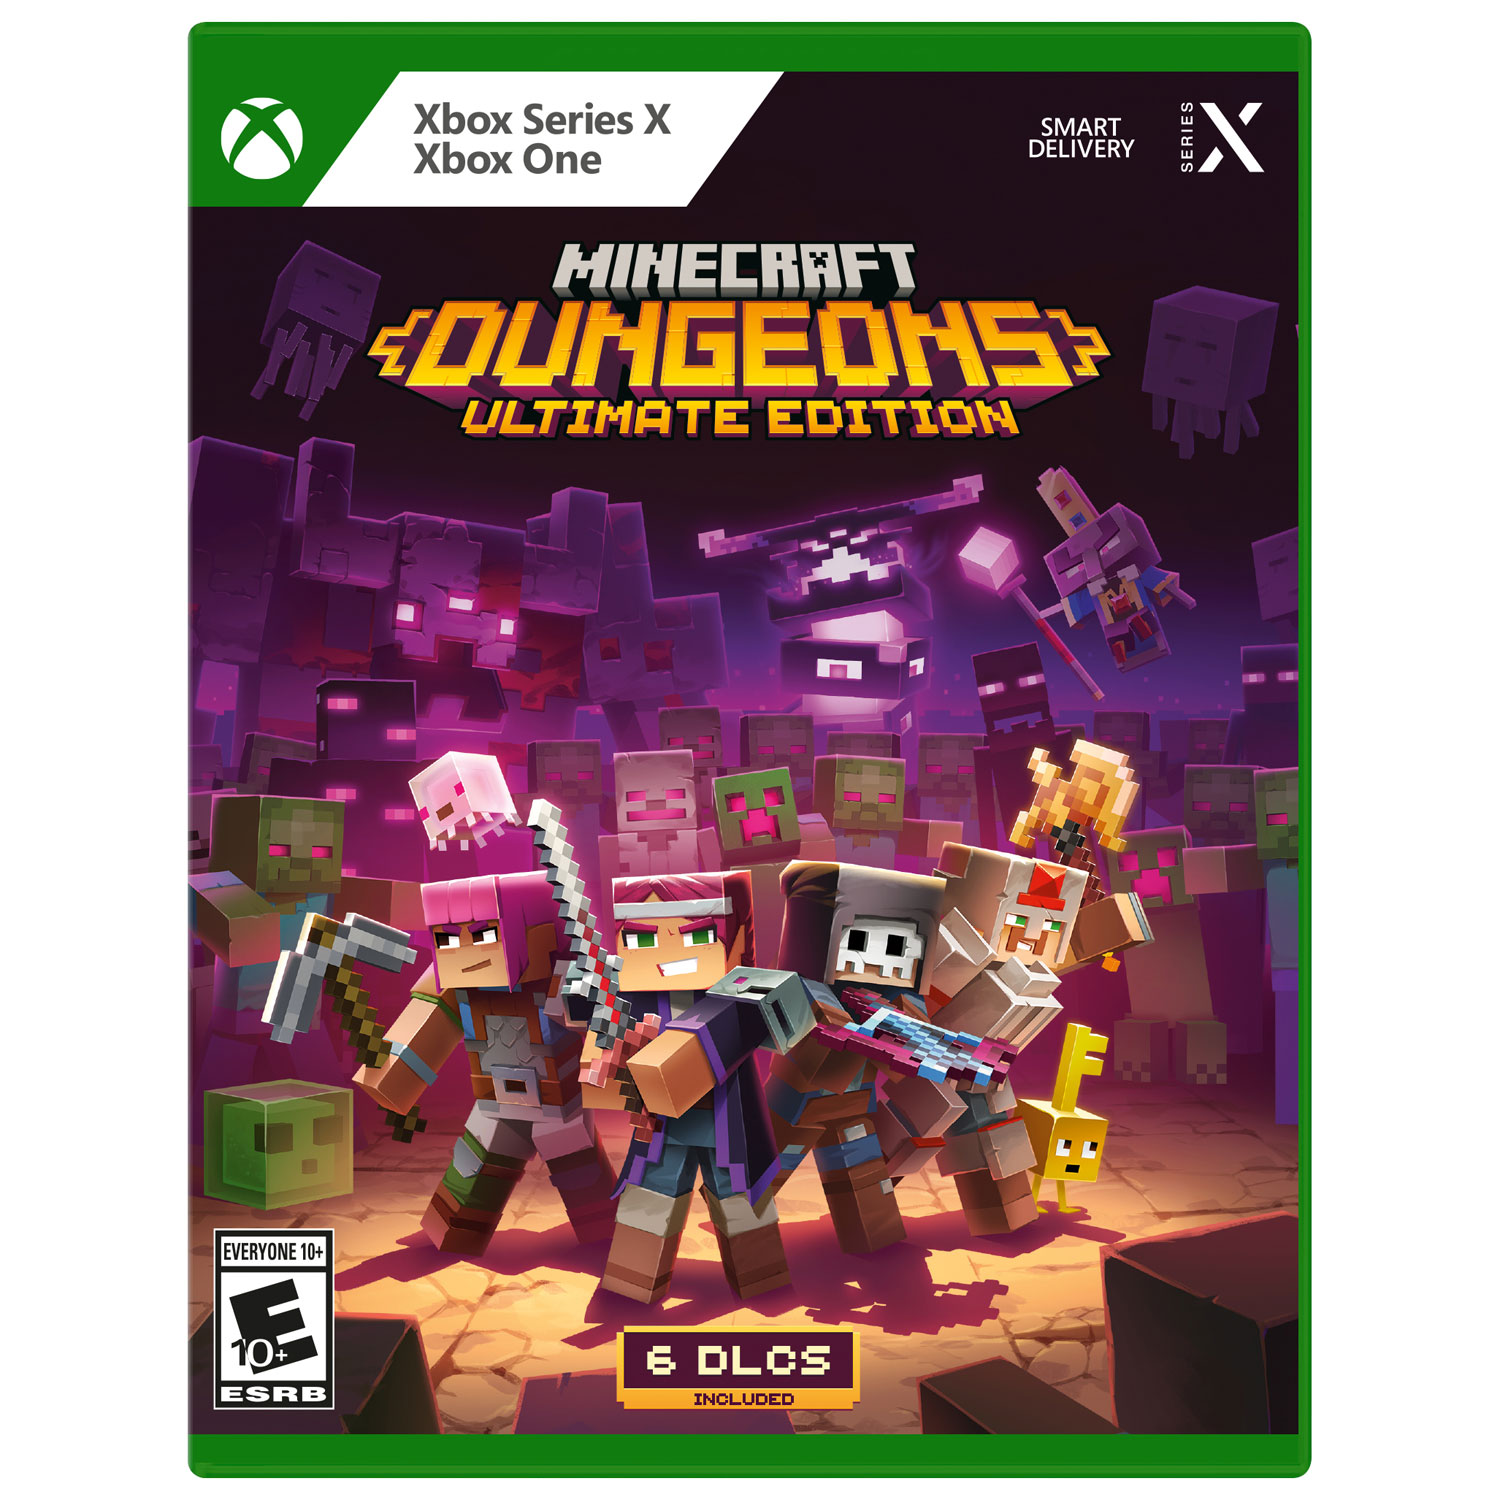 Minecraft Dungeons Ultimate Edition (Xbox Series X / Xbox One)